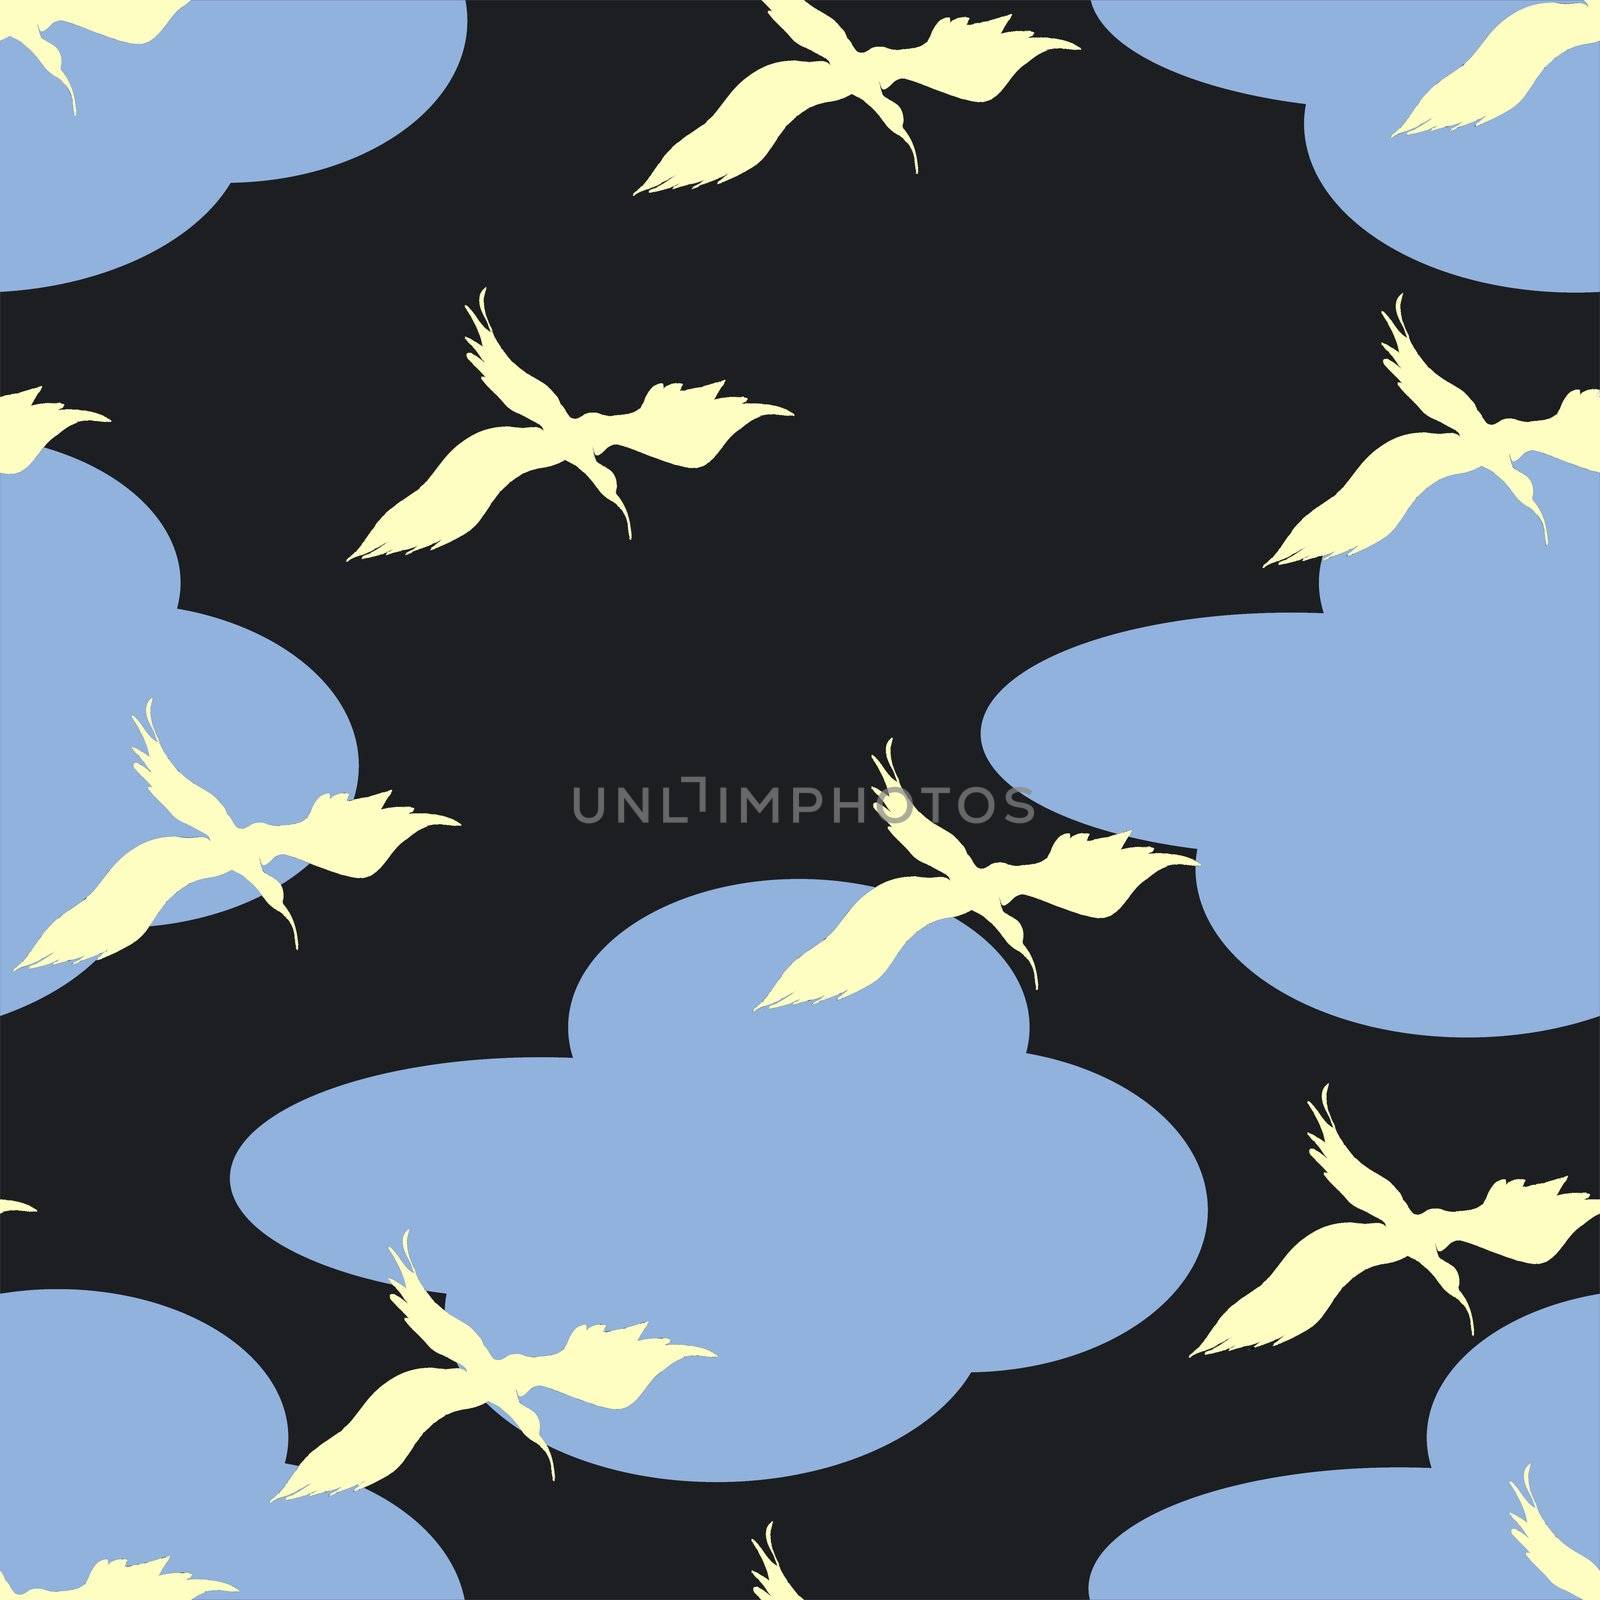 Birds and clouds pattern illustration by Lirch